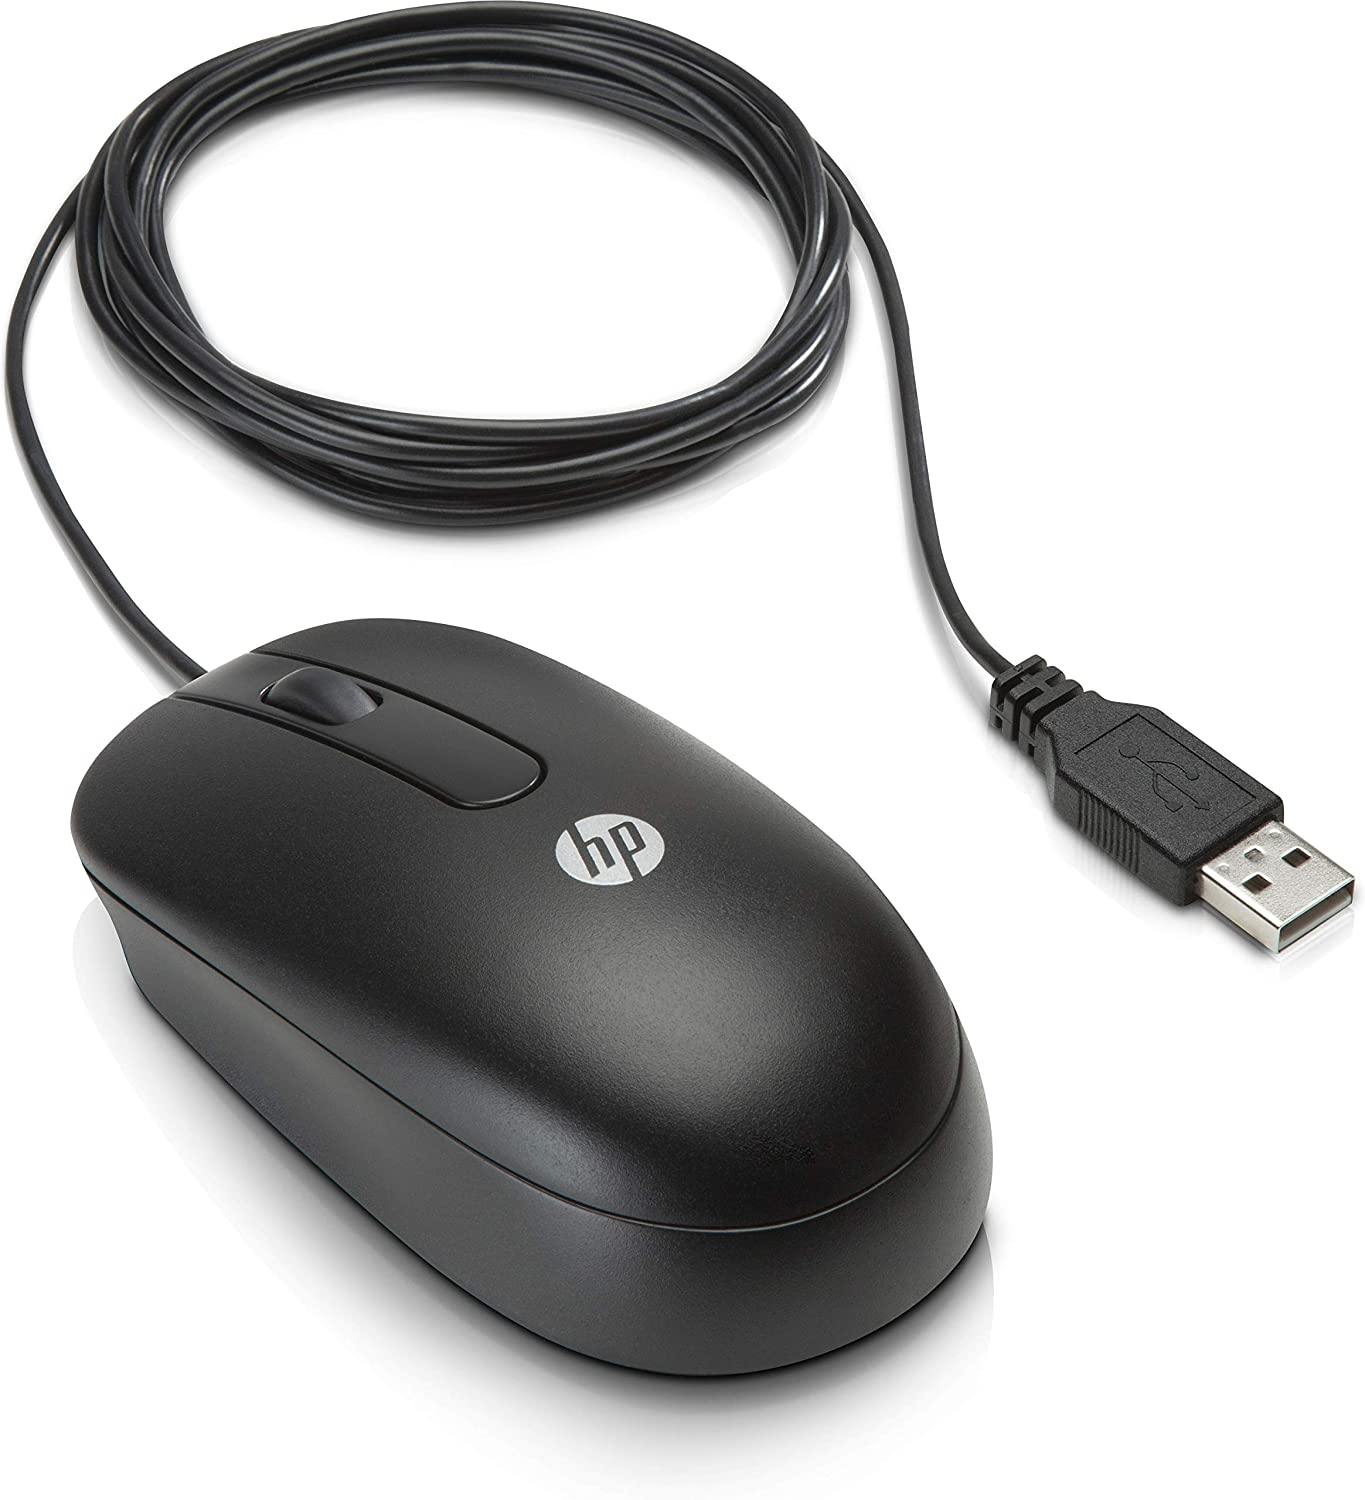 Genuine HP USB 2-Button Optical Mouse P/N: 672652-001 New - Atlas Computers & Electronics 